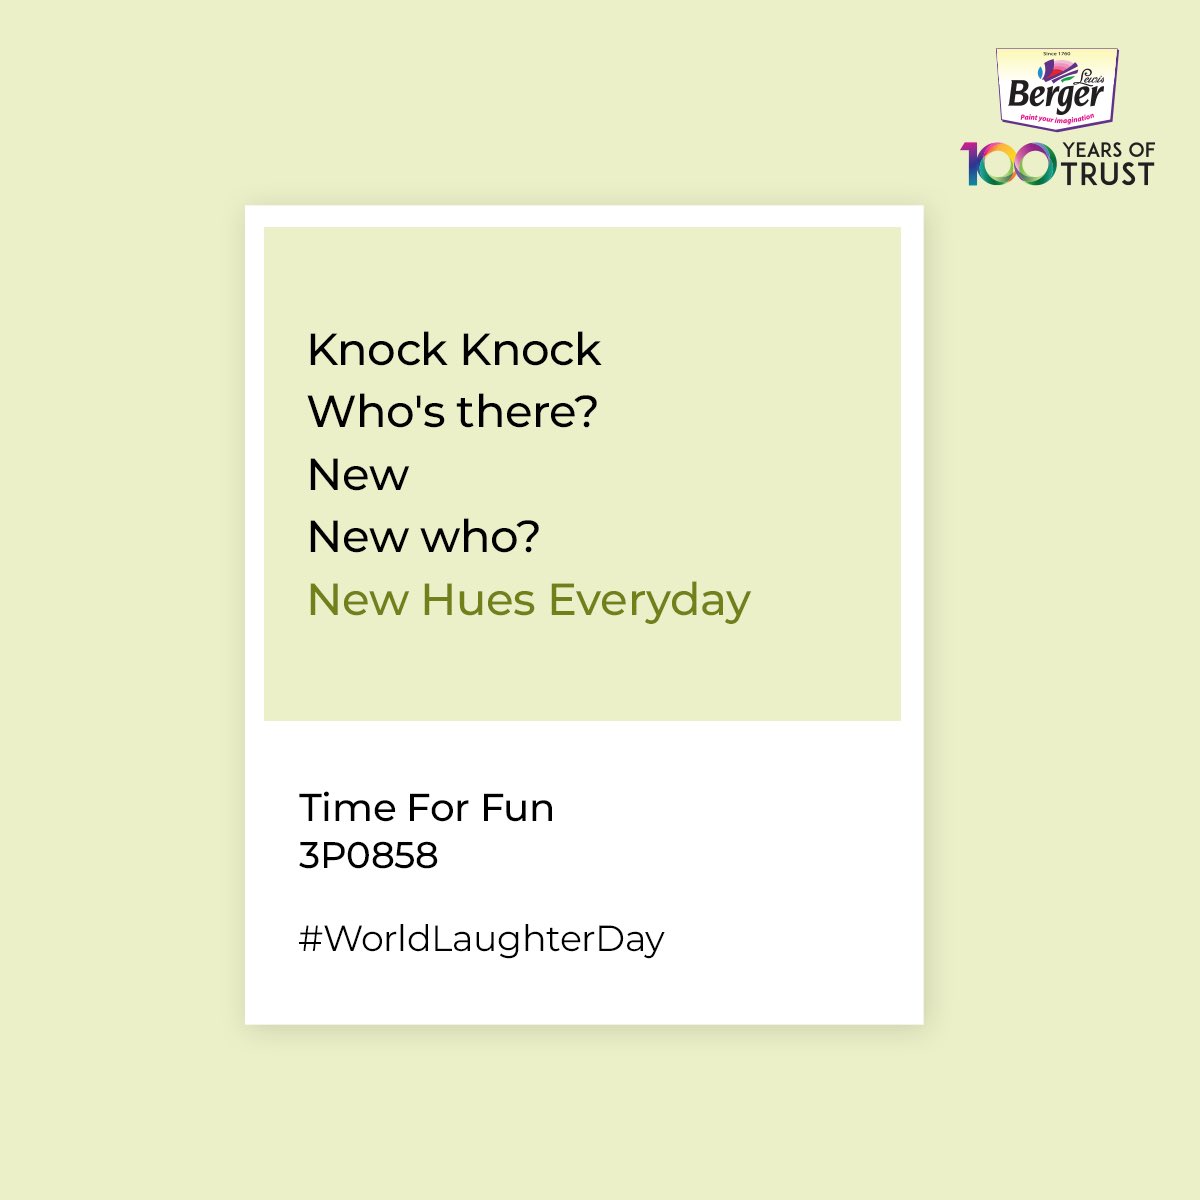 Here's to painting a smile on your face #WorldLaughterDay

#LaughingOutLoud #OkBye #BergerPaints #PaintYourImagination